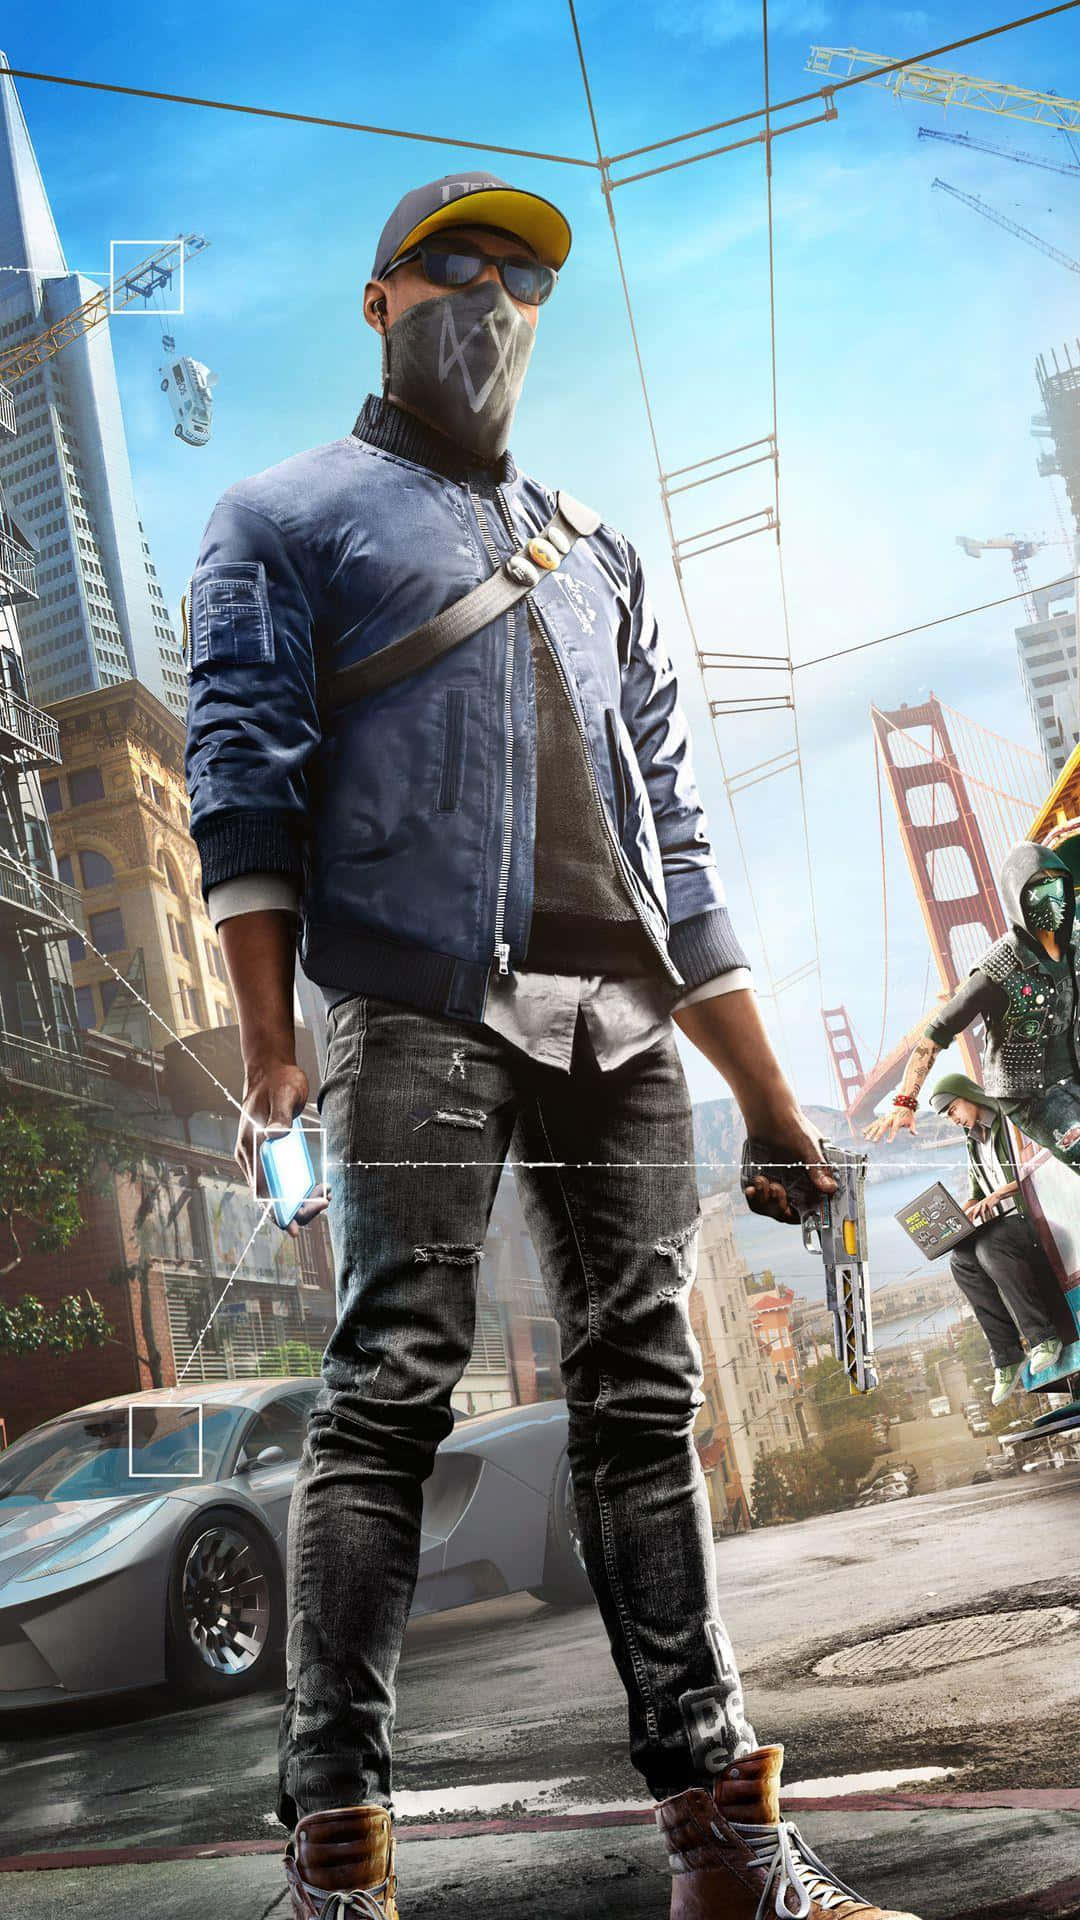 Try the game Watch Dogs on your iPhone! Wallpaper